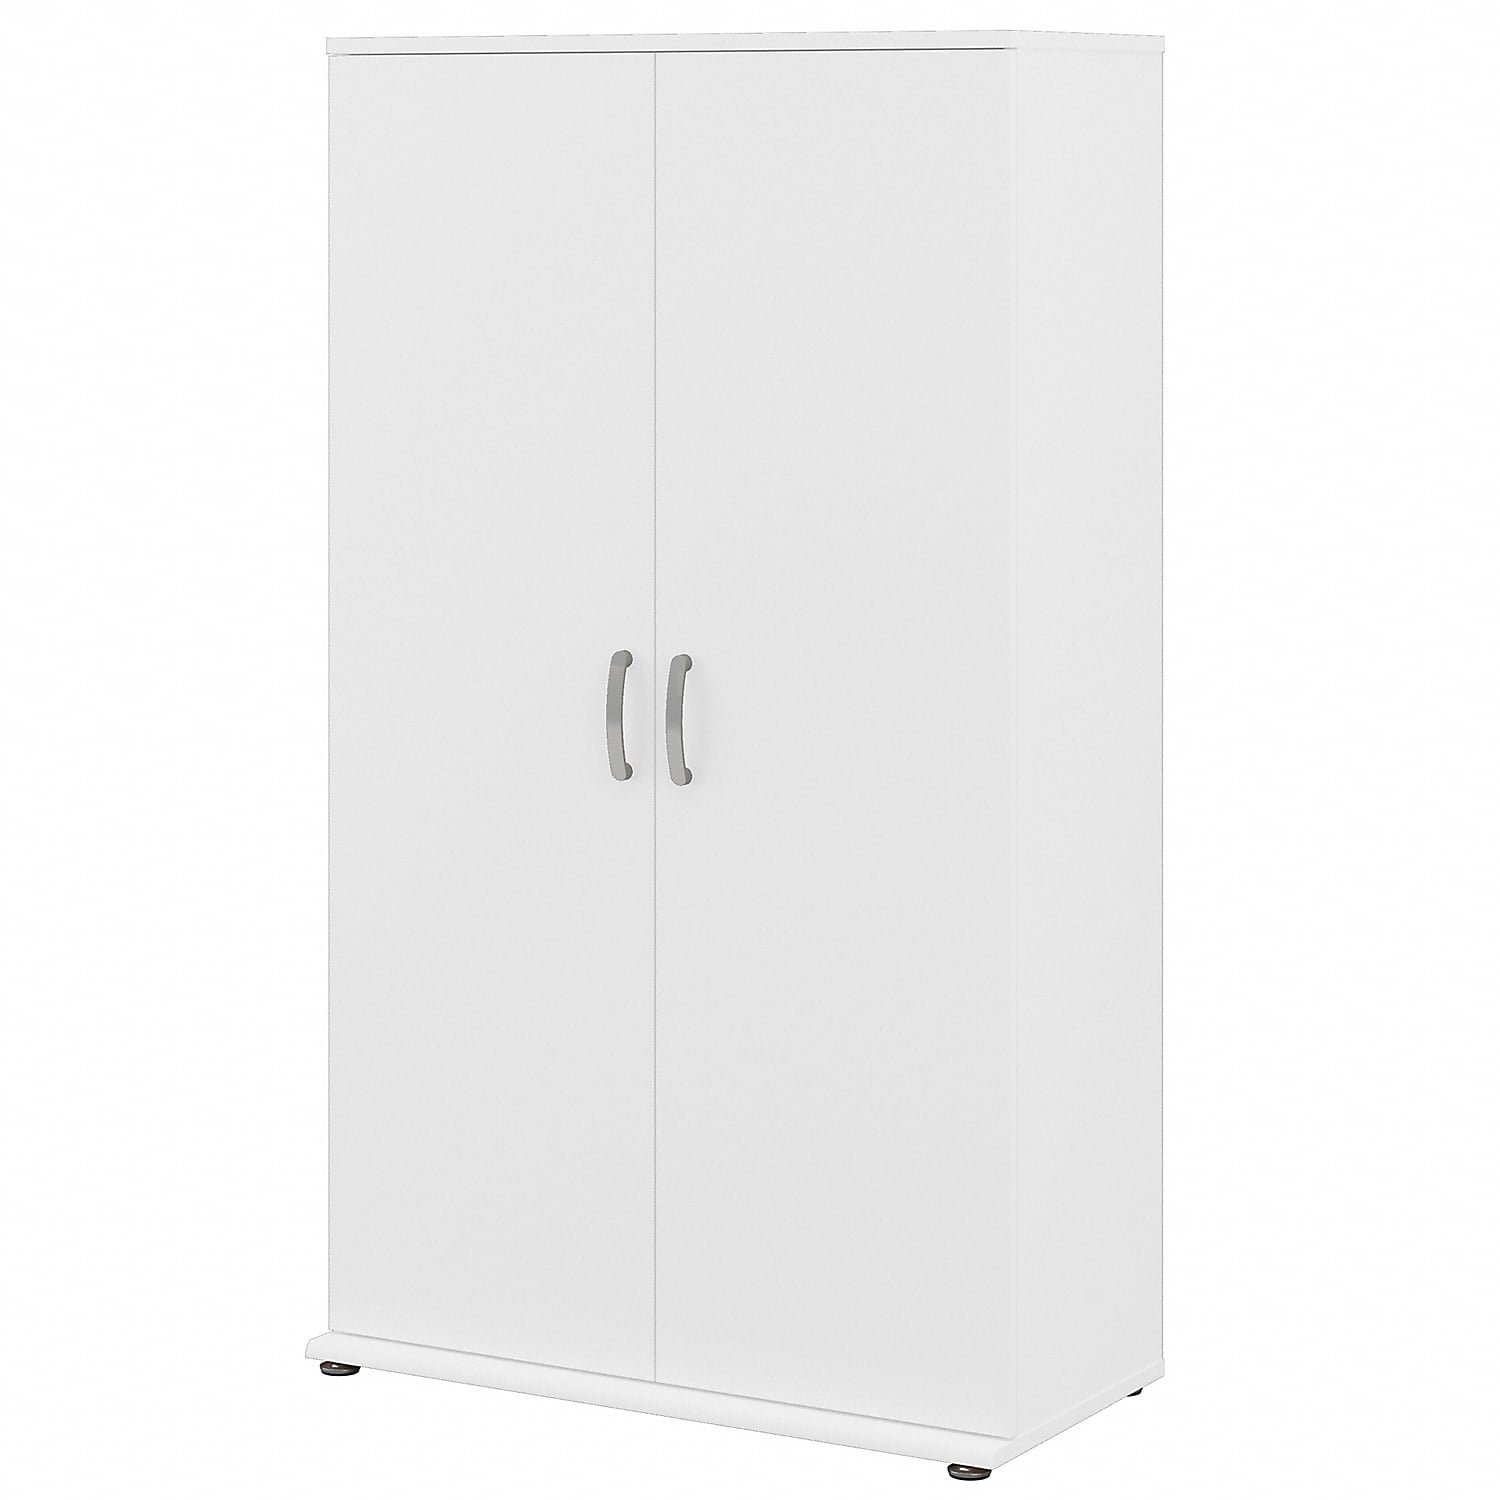 Details about   White Resin Pantry Storage Cabinet 5 Shelves Laundry Organizer Utility Garage 